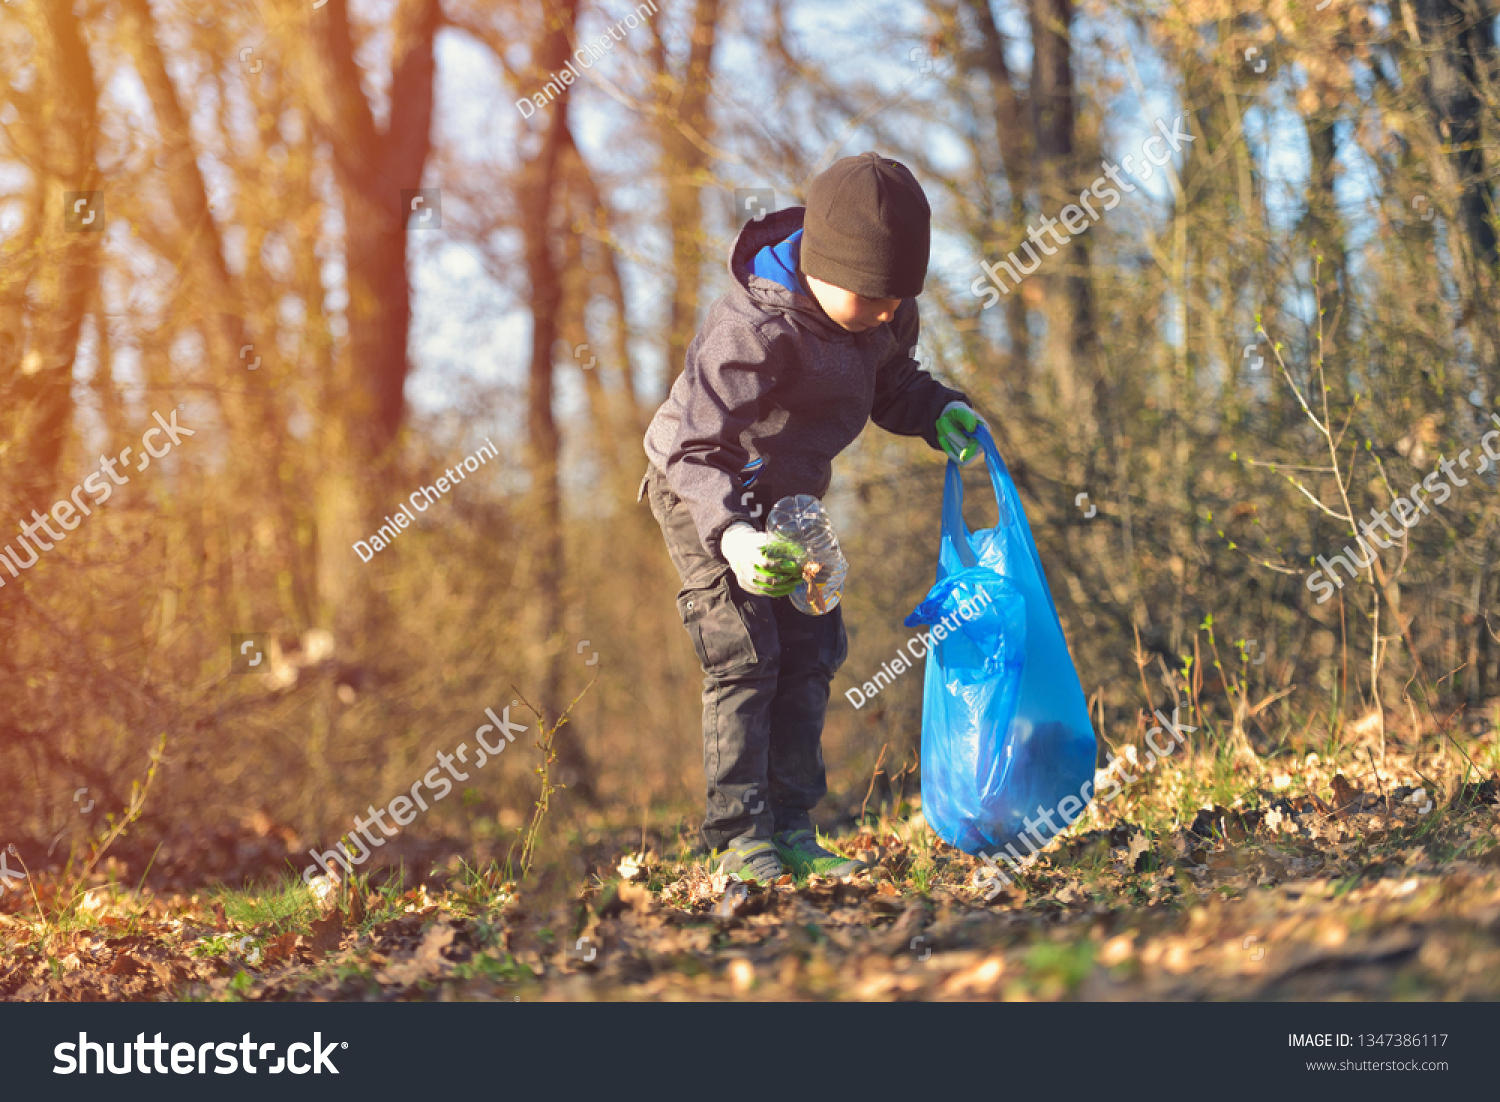 Recycle waste litter rubbish garbage trash junk clean training. Nature cleaning, volunteer ecology green concept. Young men and boys pick up spring forest at sunset. Environment plastic pollution #1347386117